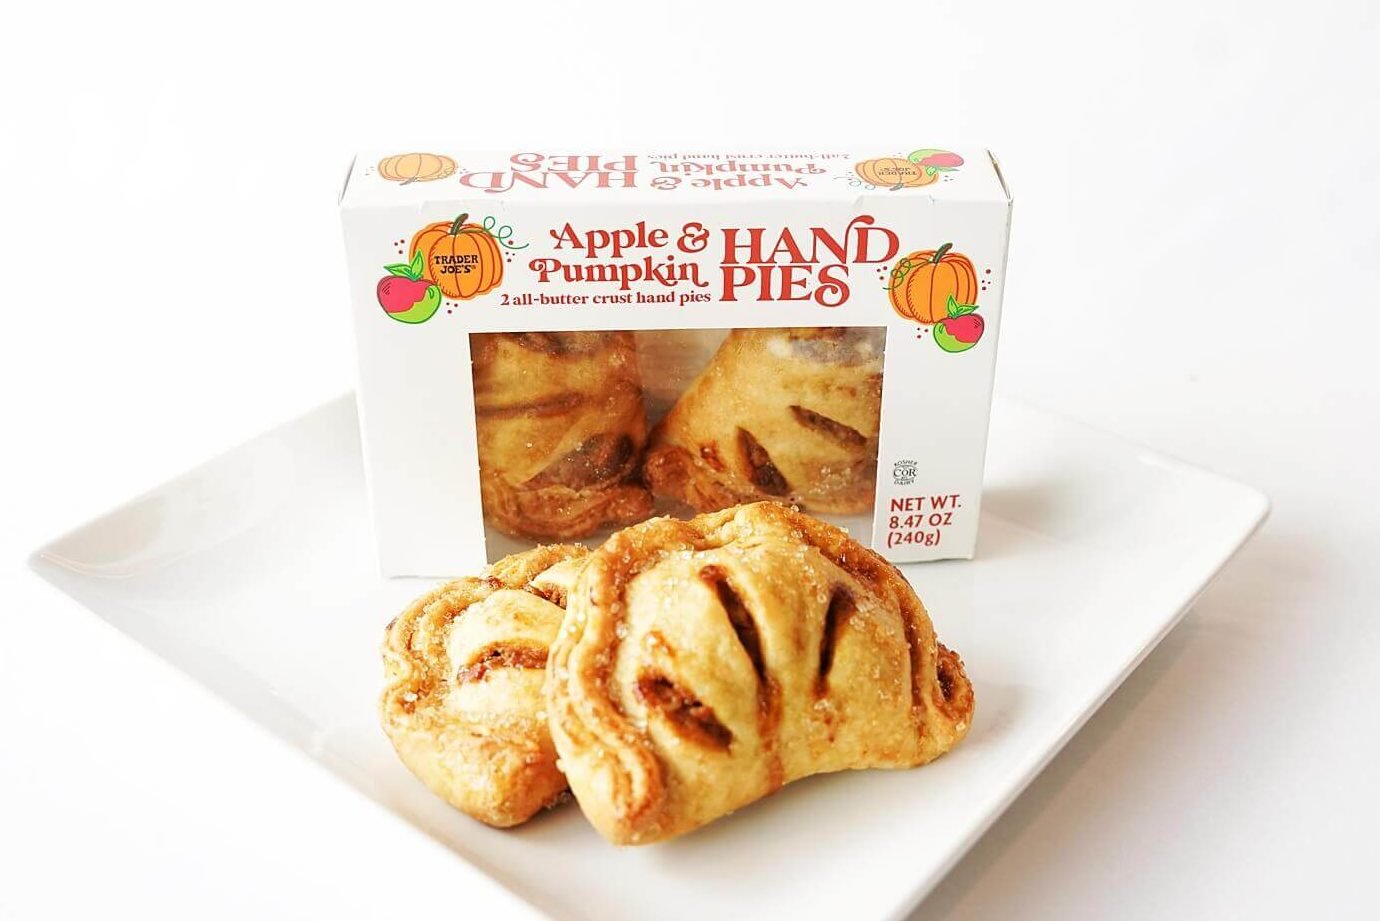 Trader Joe's Hand Pies in box and on plate